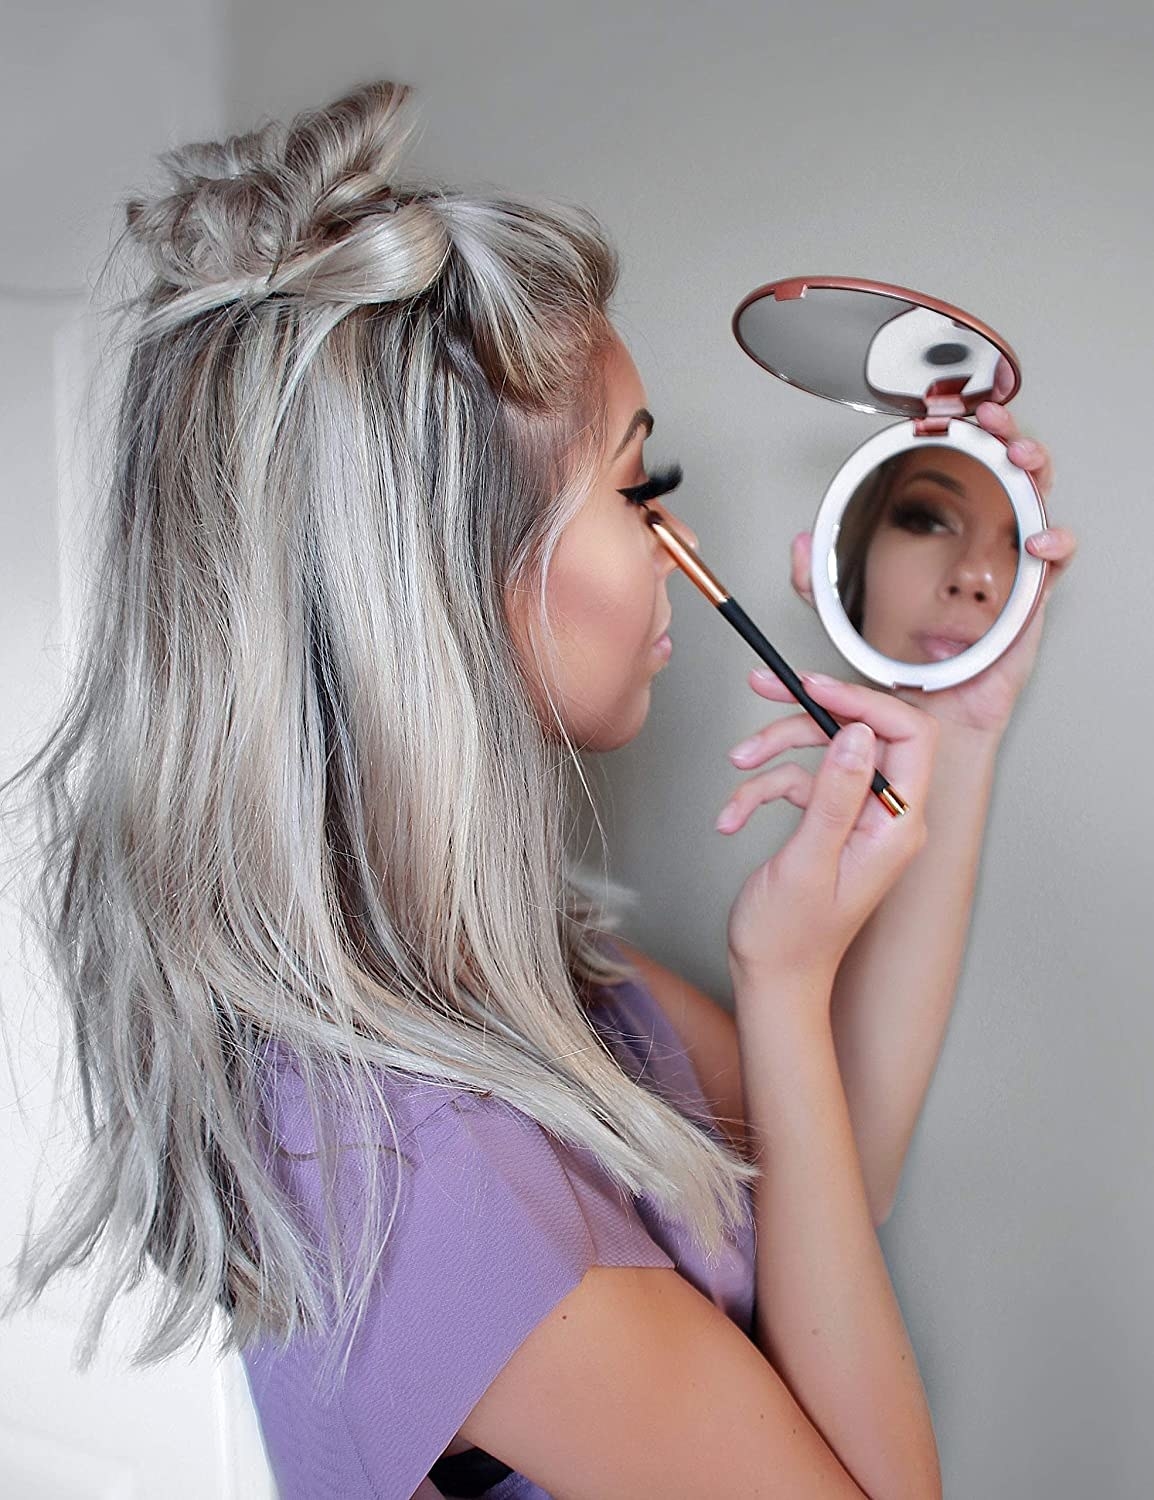 A person using the compact while doing their makeup